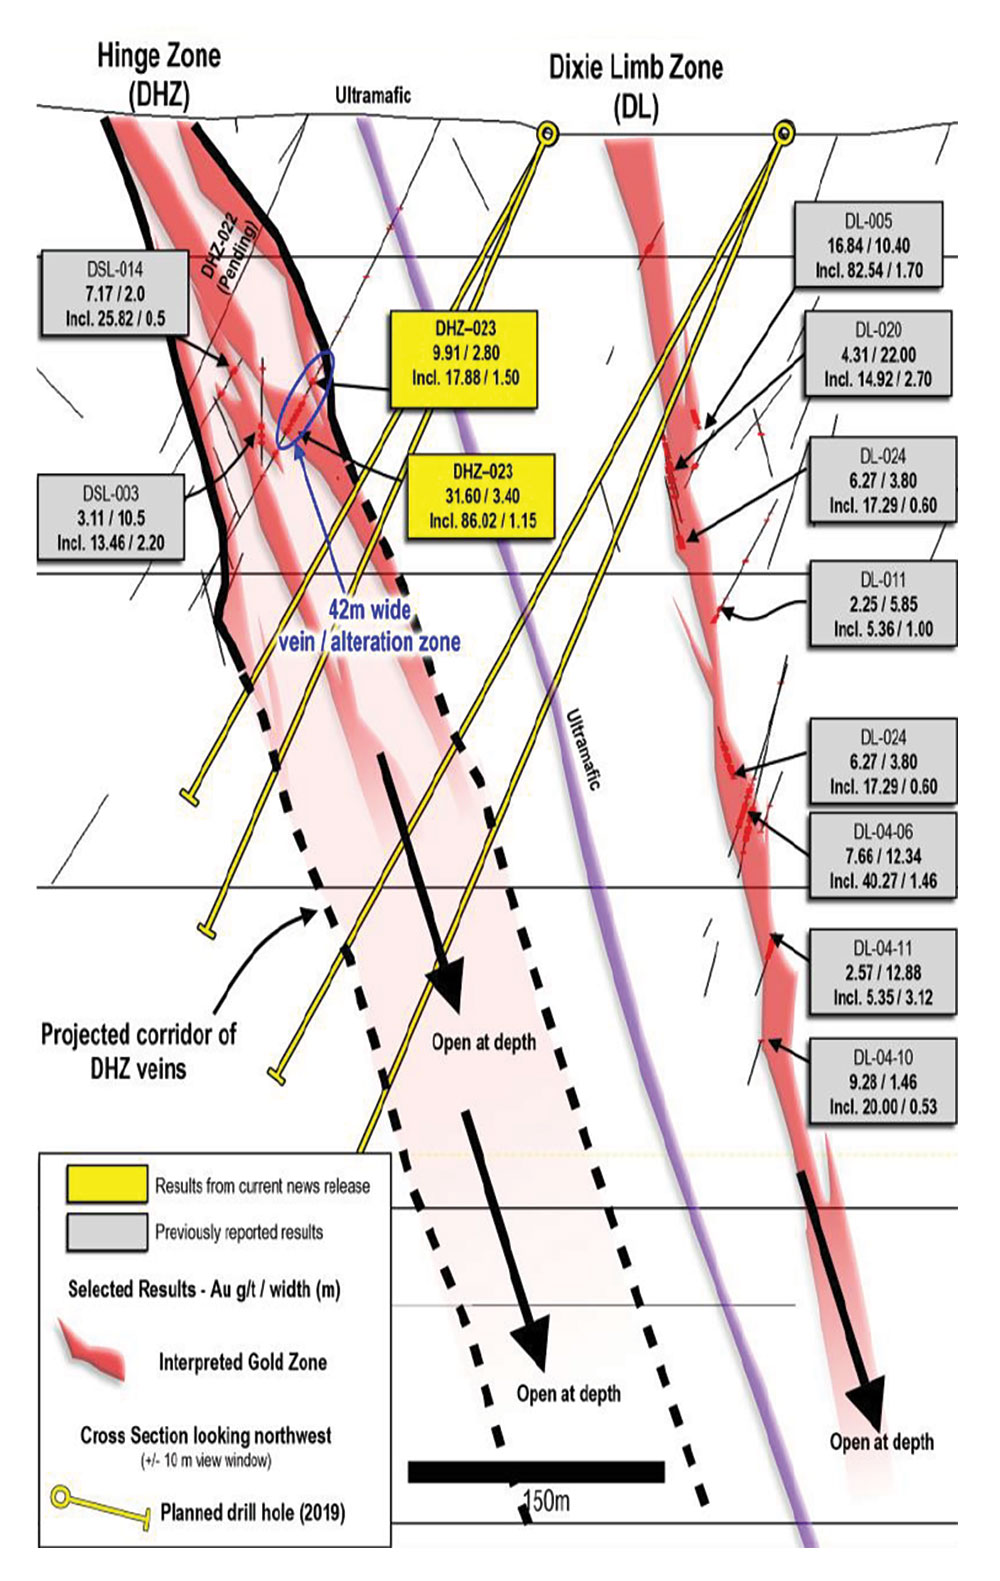 Cross section through the DHZ (view to west) as drilled to-date, showing the approximately 100 metre wide corridor of multiple high-grade gold veins. New results are highlighted in yellow. The DL zone is also shown on the right of the image.